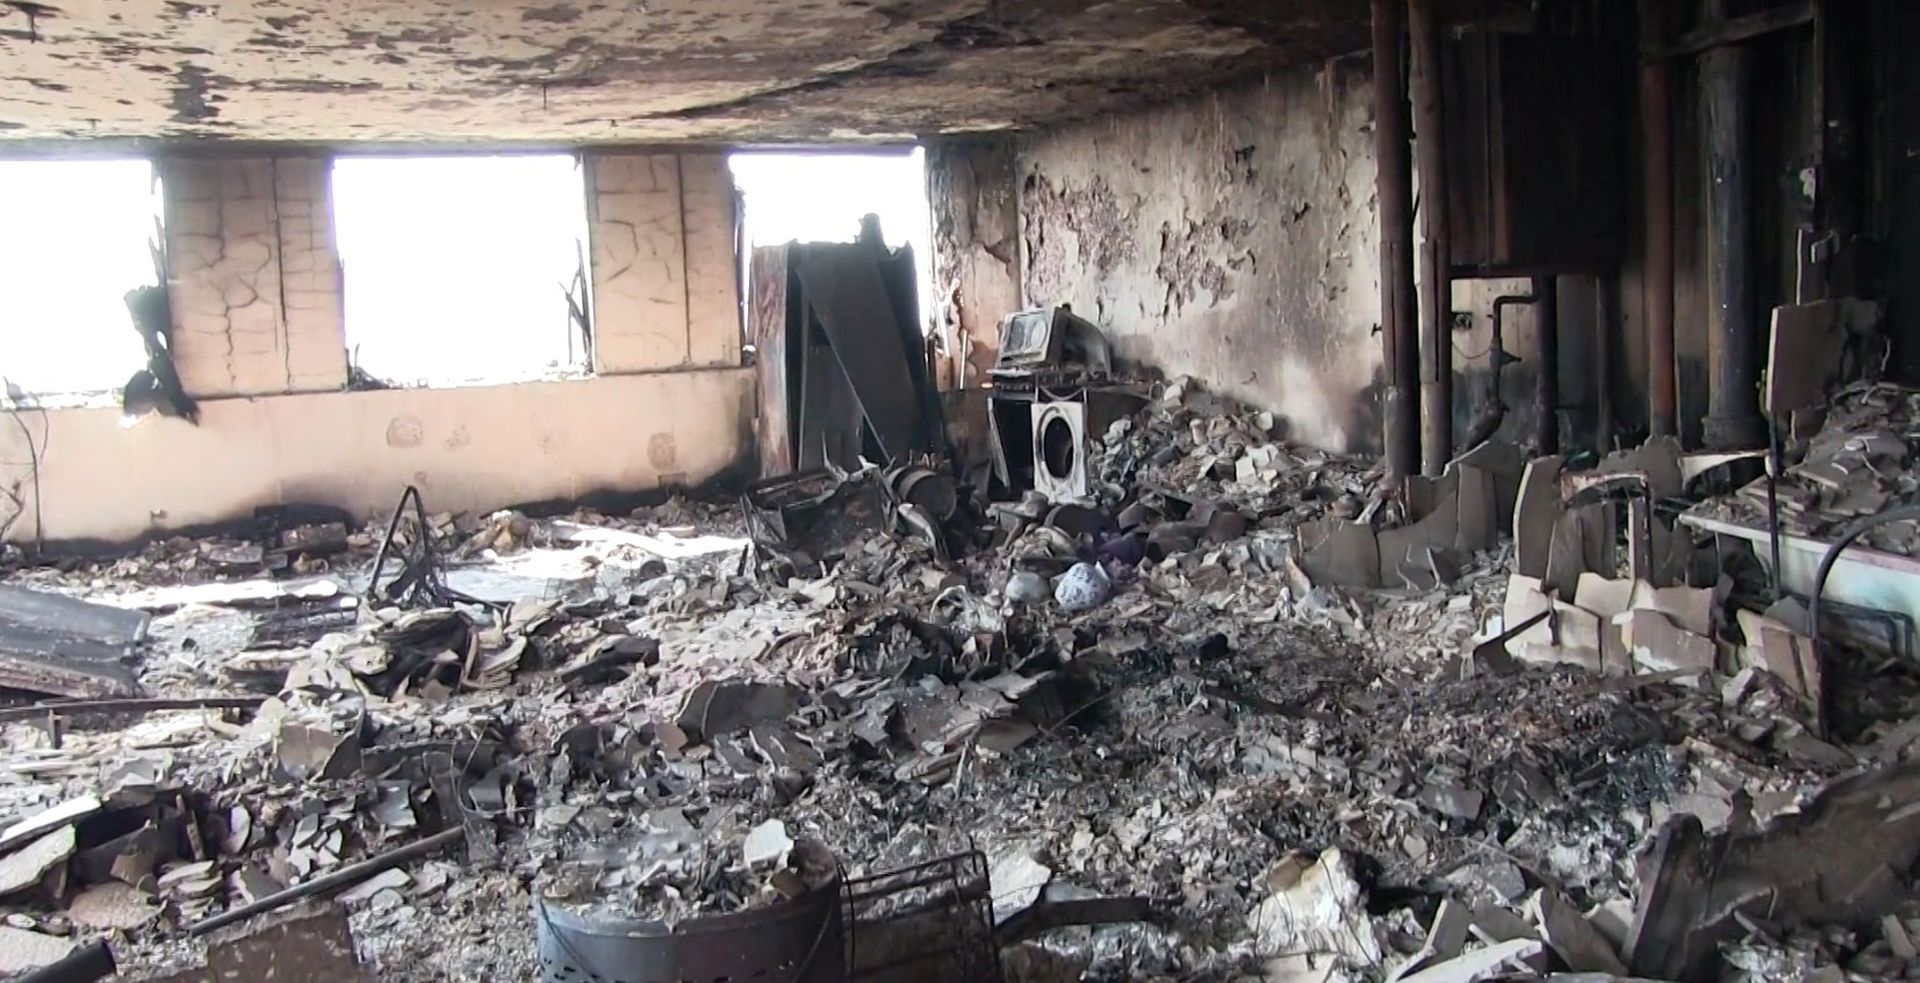 epa06036327 An undated handout video grab made available by Britain's London Metropolitan Police Service (MPS) on 18 June 2017 shows a view on a burned flat inside the Grenfell Tower, a 24-storey apartment block in North Kensington, West London, Britain. Police investigates the fire at the Grenfell Tower that broke out on 14 June 2017. At least 58 people are now missing and presumed dead in the Grenfell Tower disaster, police have said. This latest figure includes the 30 already confirmed to have died in the fire.The cause of the fire is yet not known.  EPA/LONDON METROPOLITAN POLICE / HANDOUT  HANDOUT EDITORIAL USE ONLY/NO SALES